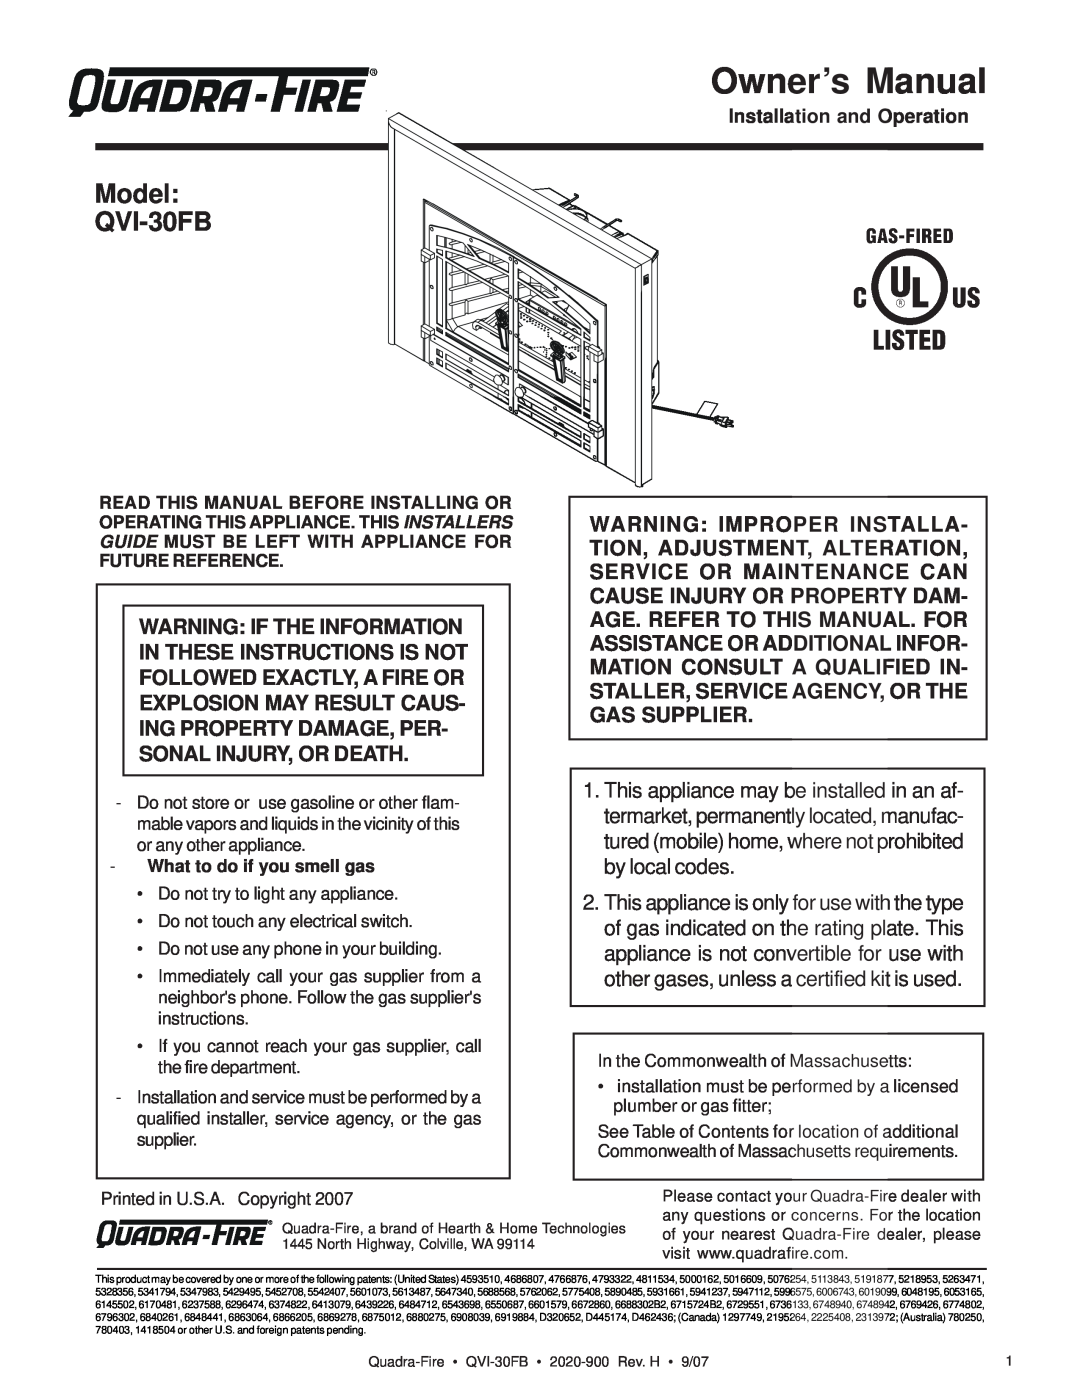 Quadra-Fire owner manual Model QVI-30FB, Installation and Operation, What to do if you smell gas 